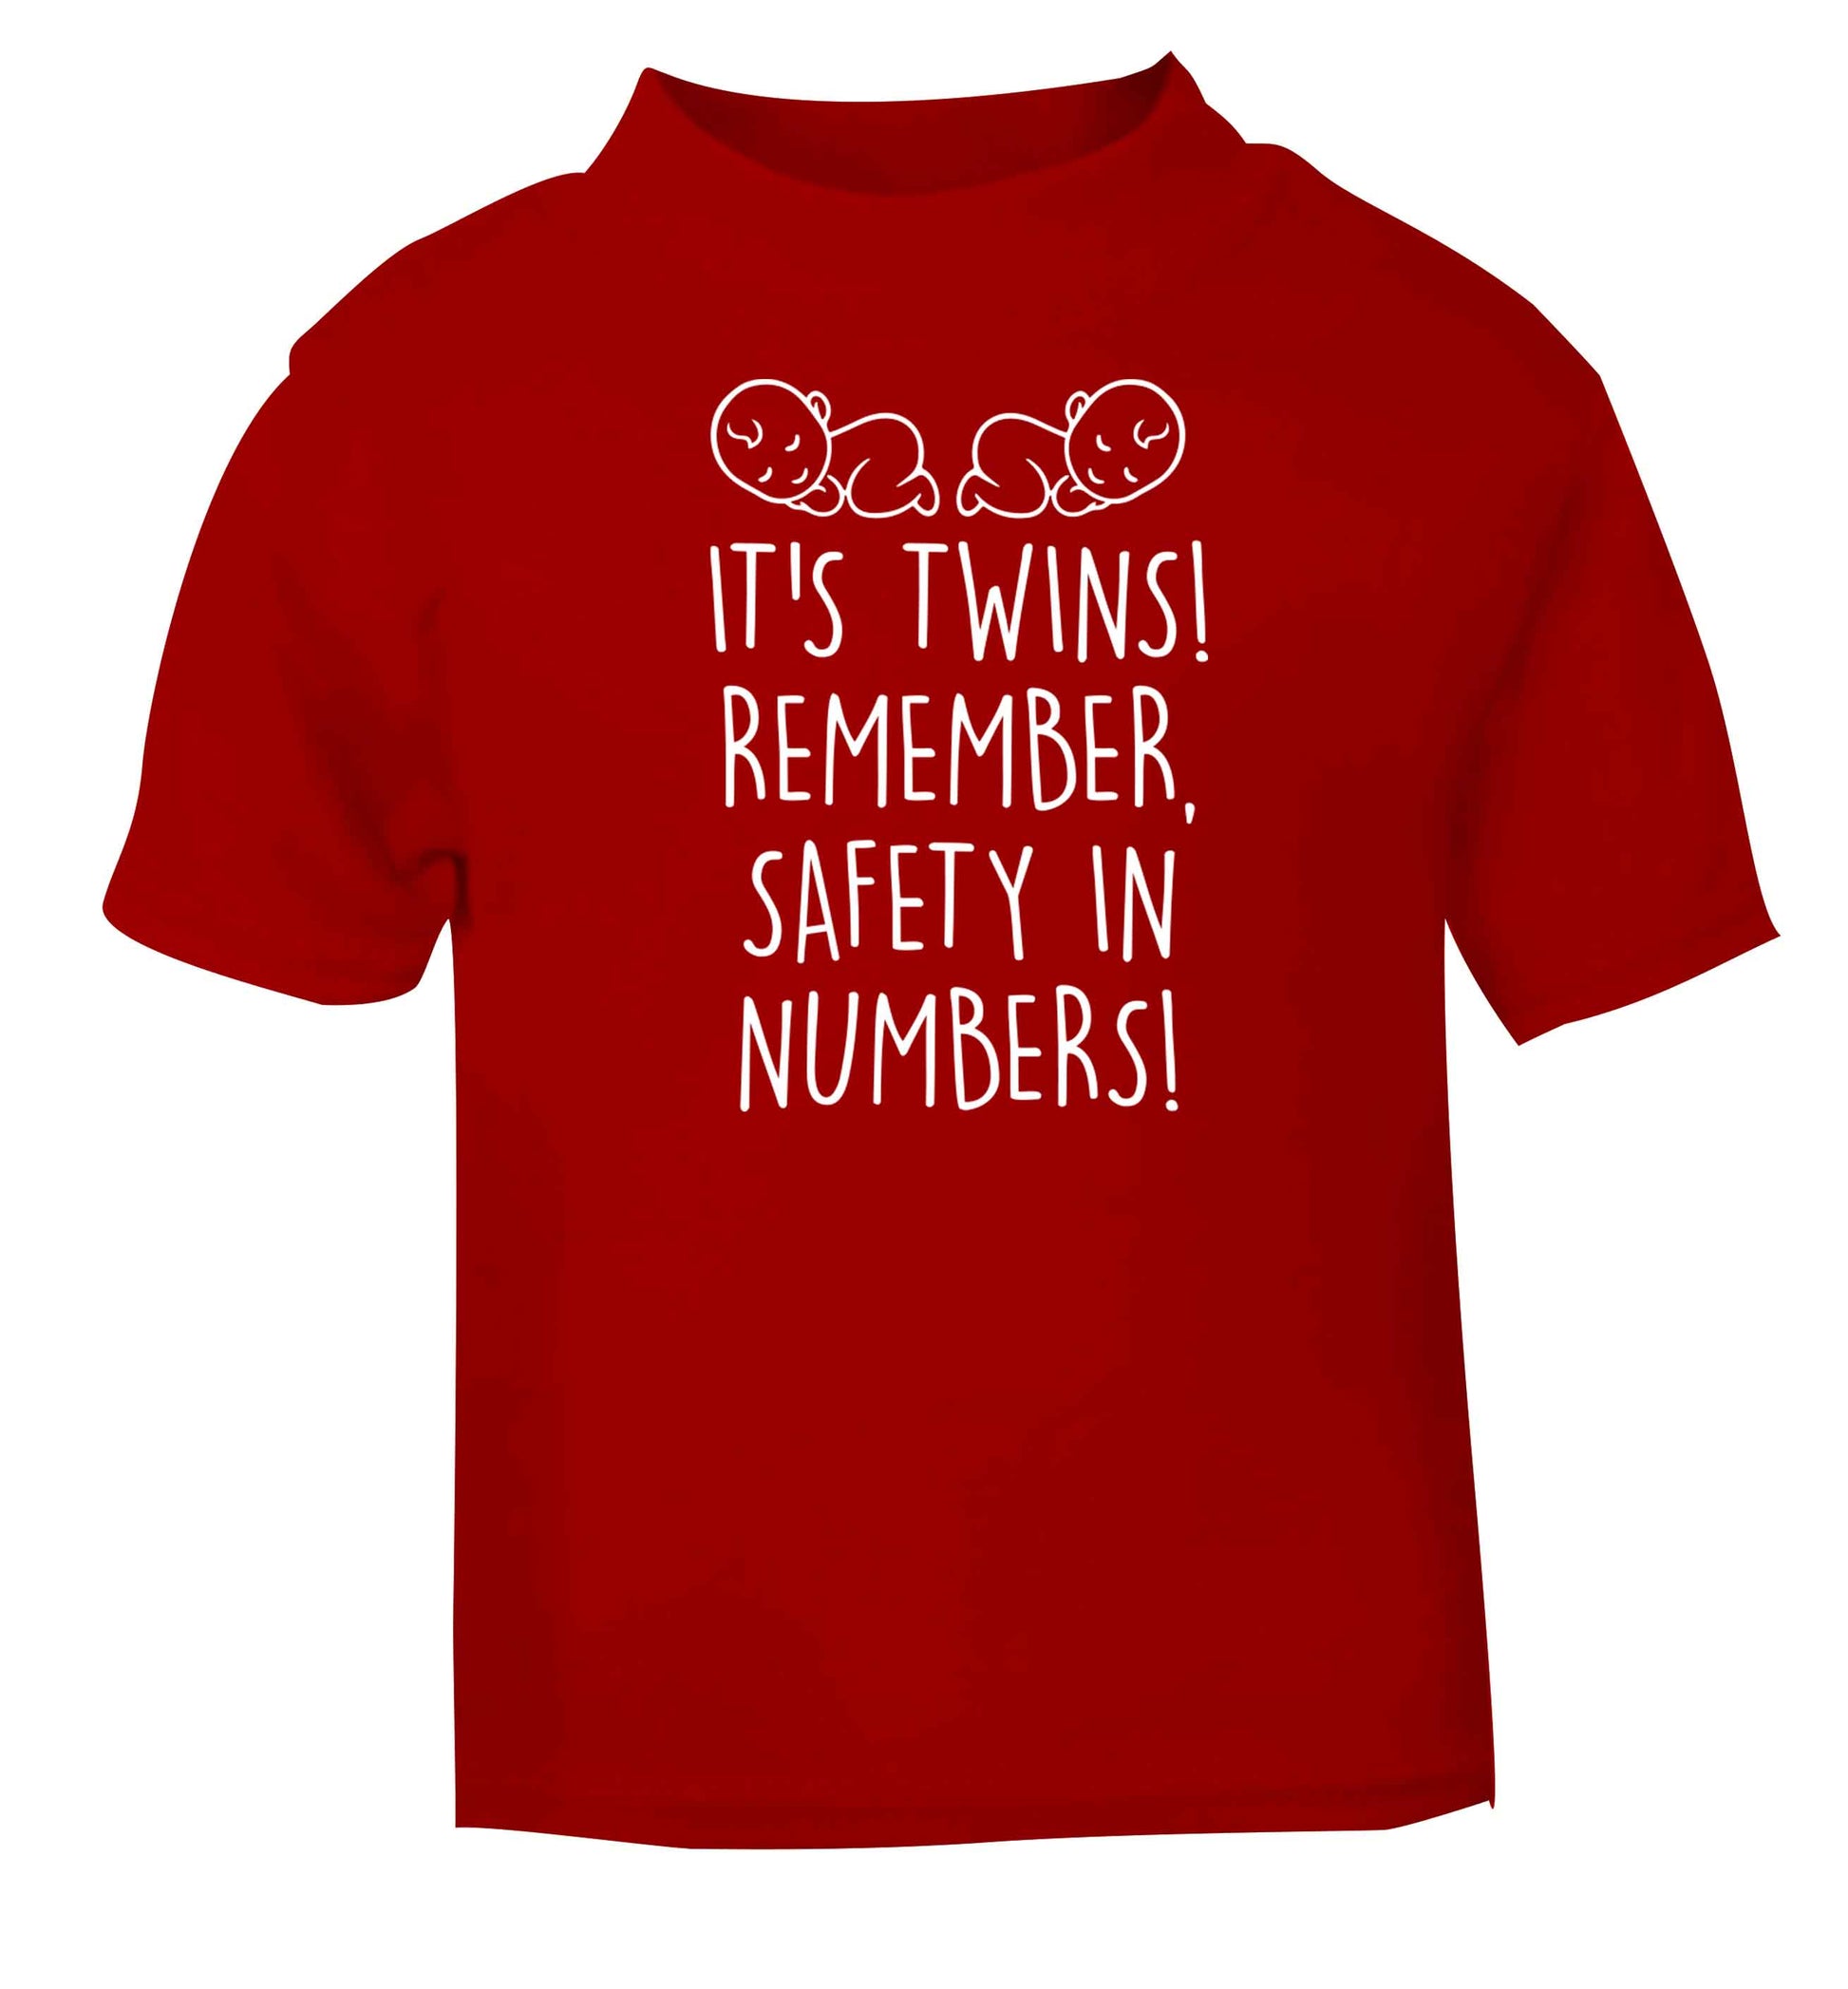 It's twins! Remember safety in numbers! red baby toddler Tshirt 2 Years